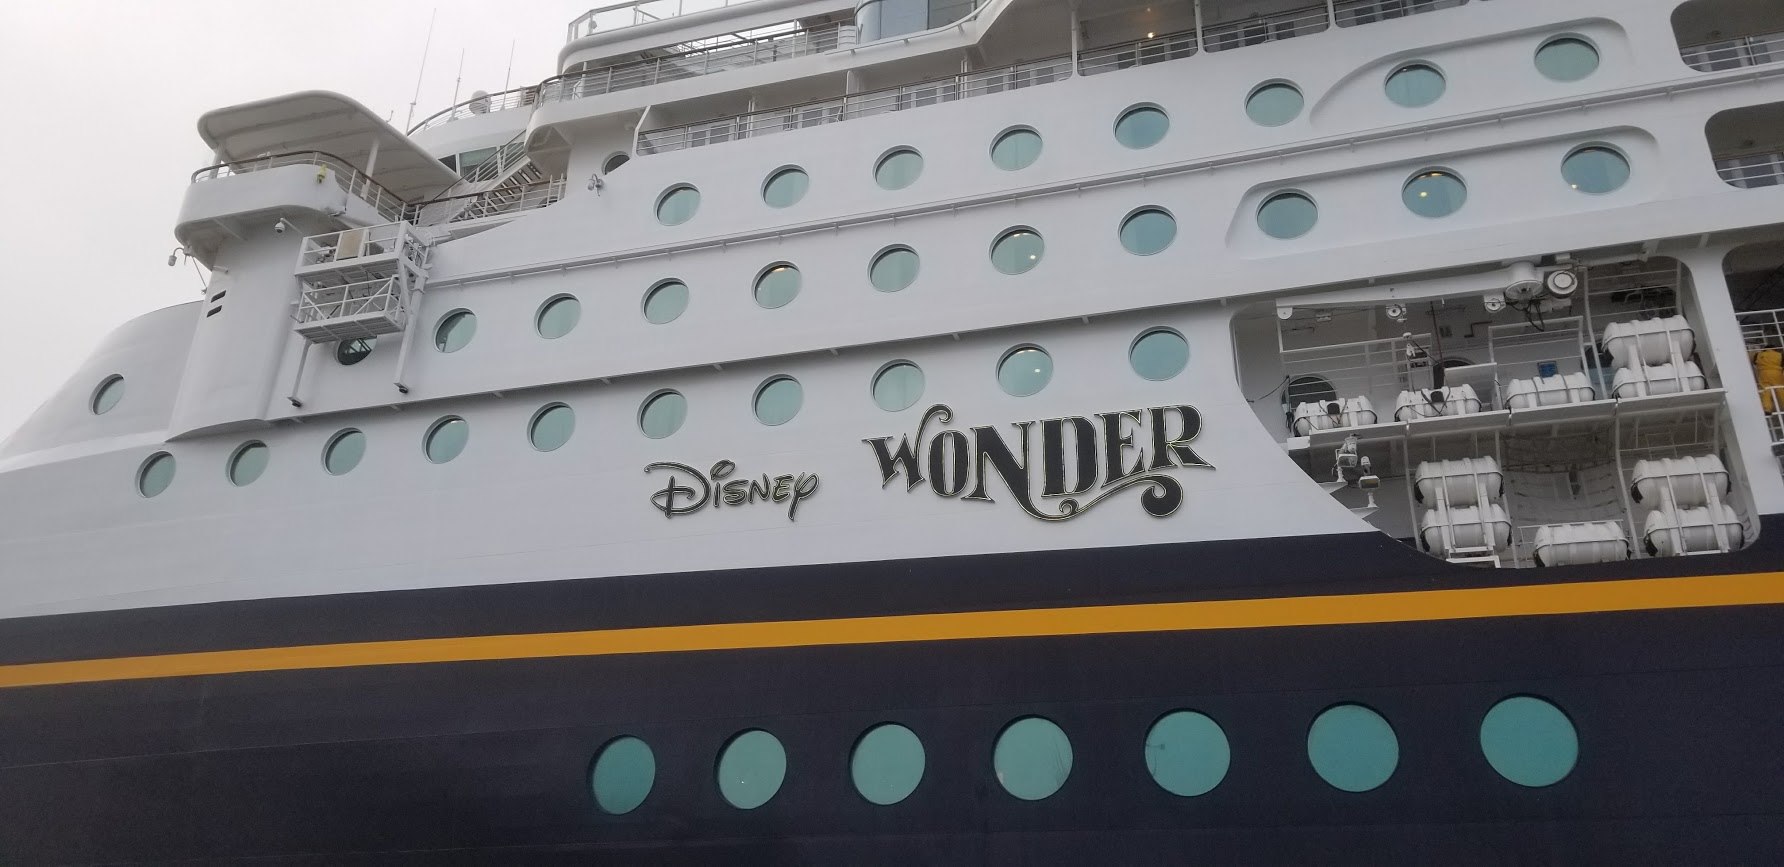 Disney Wonder has made it to Port Canaveral